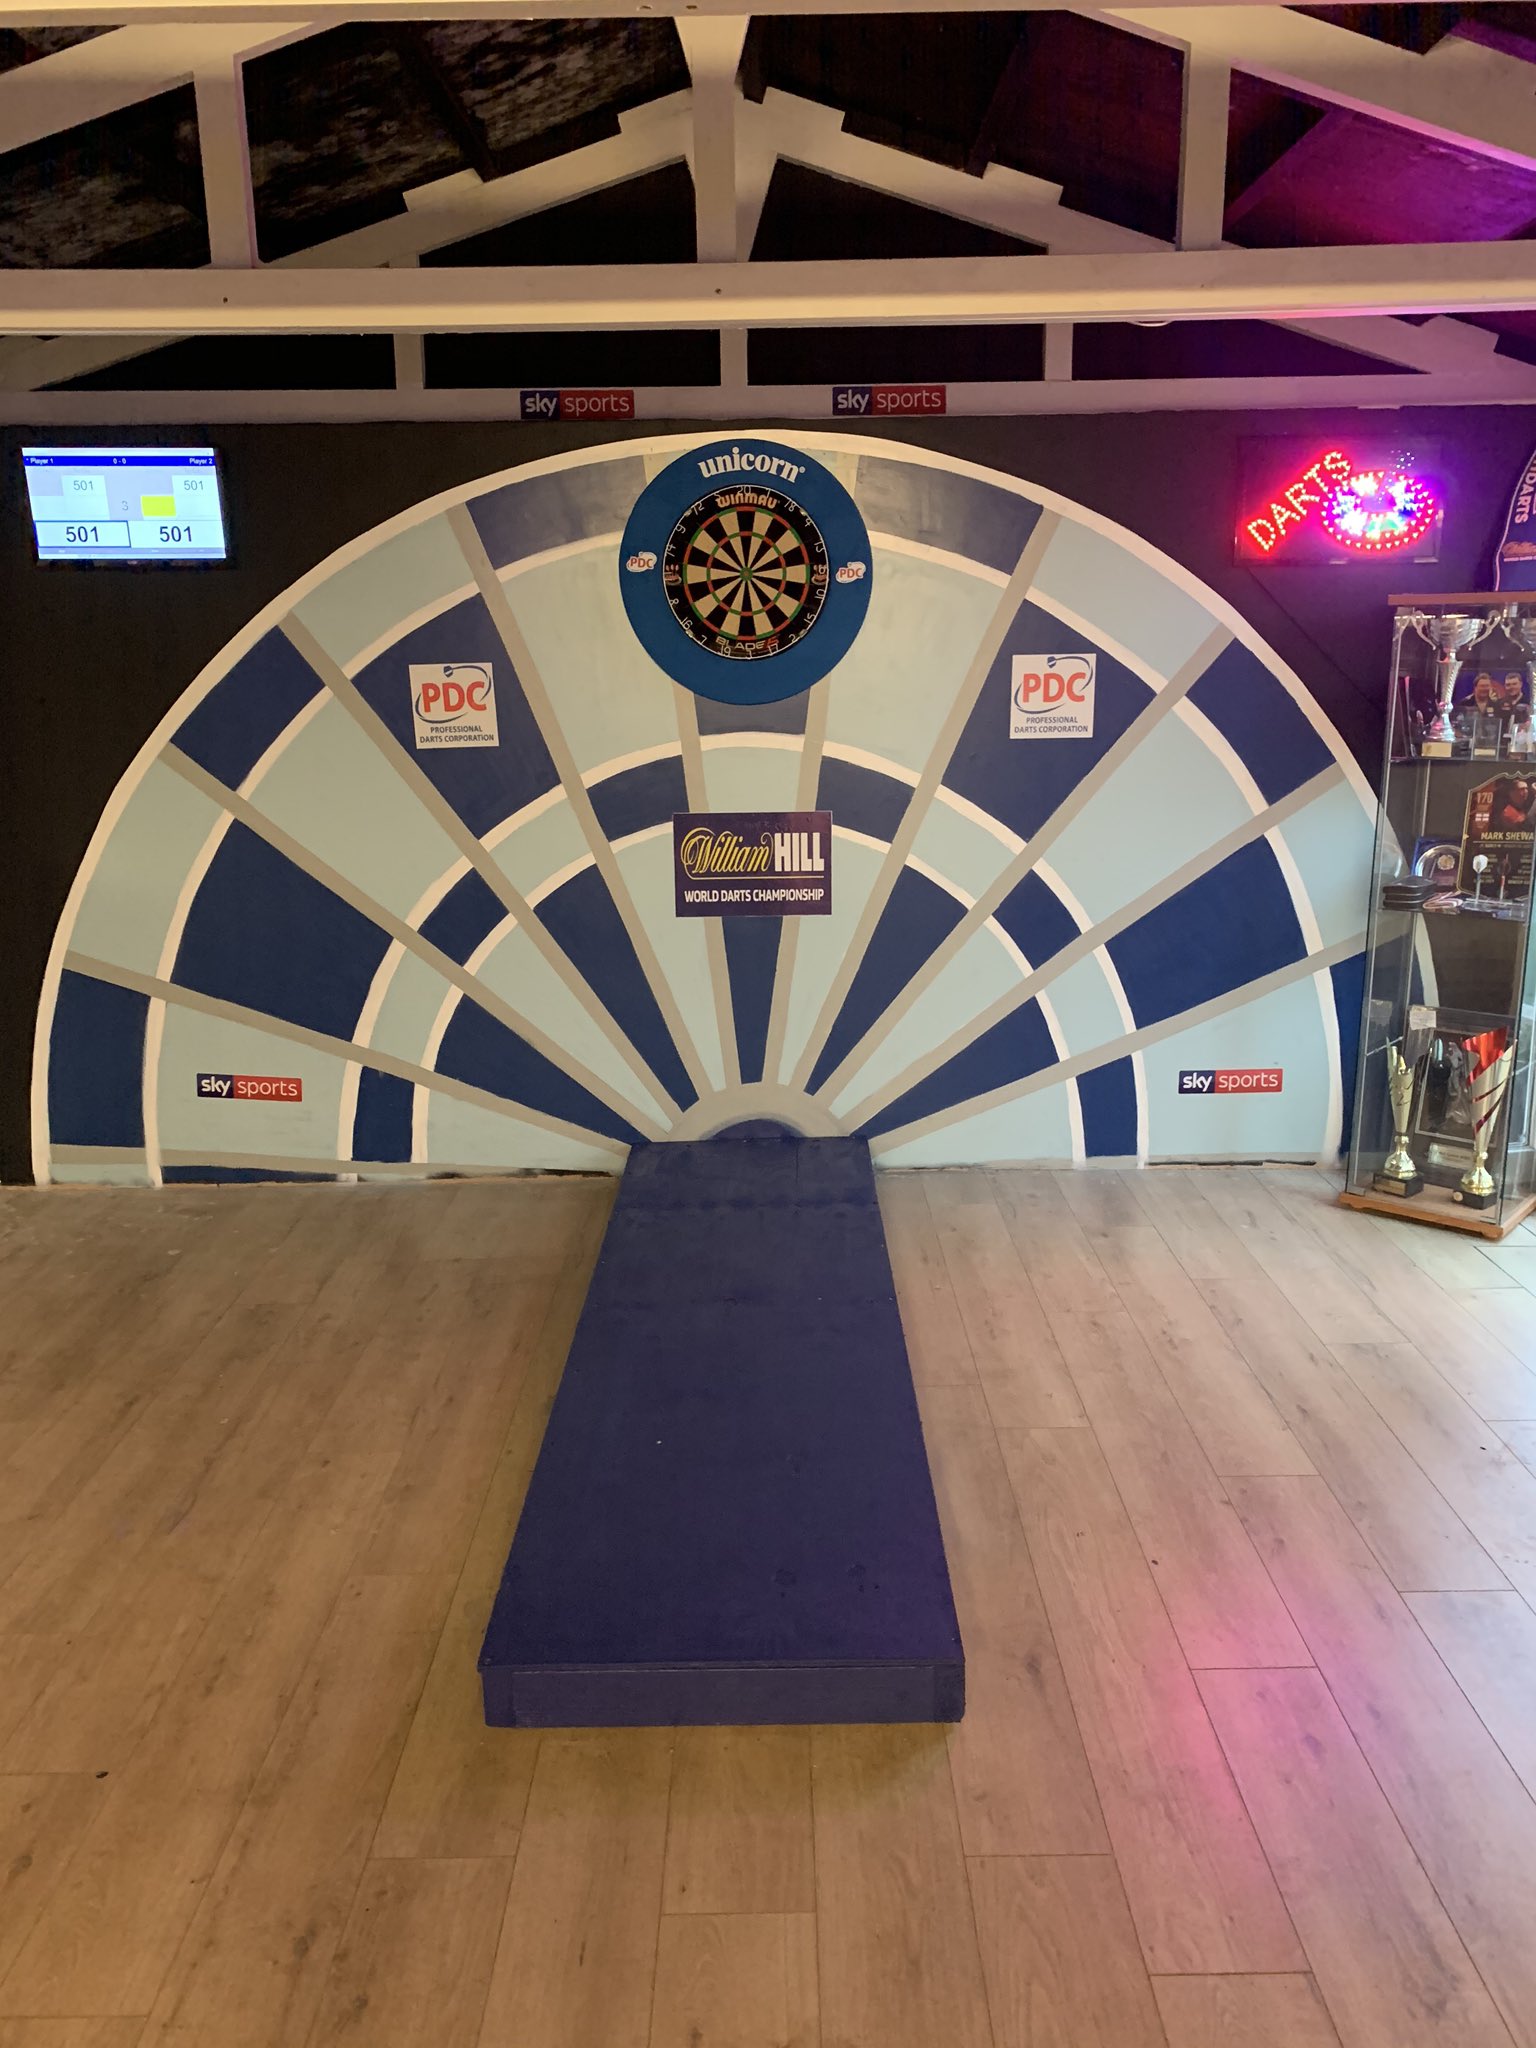 spontan Utilgængelig Nøjagtighed Mark Shewan on Twitter: "If you're gunna build a darts oche you may as well  do it proper ha 🎯 https://t.co/lYCx6OiDse" / Twitter